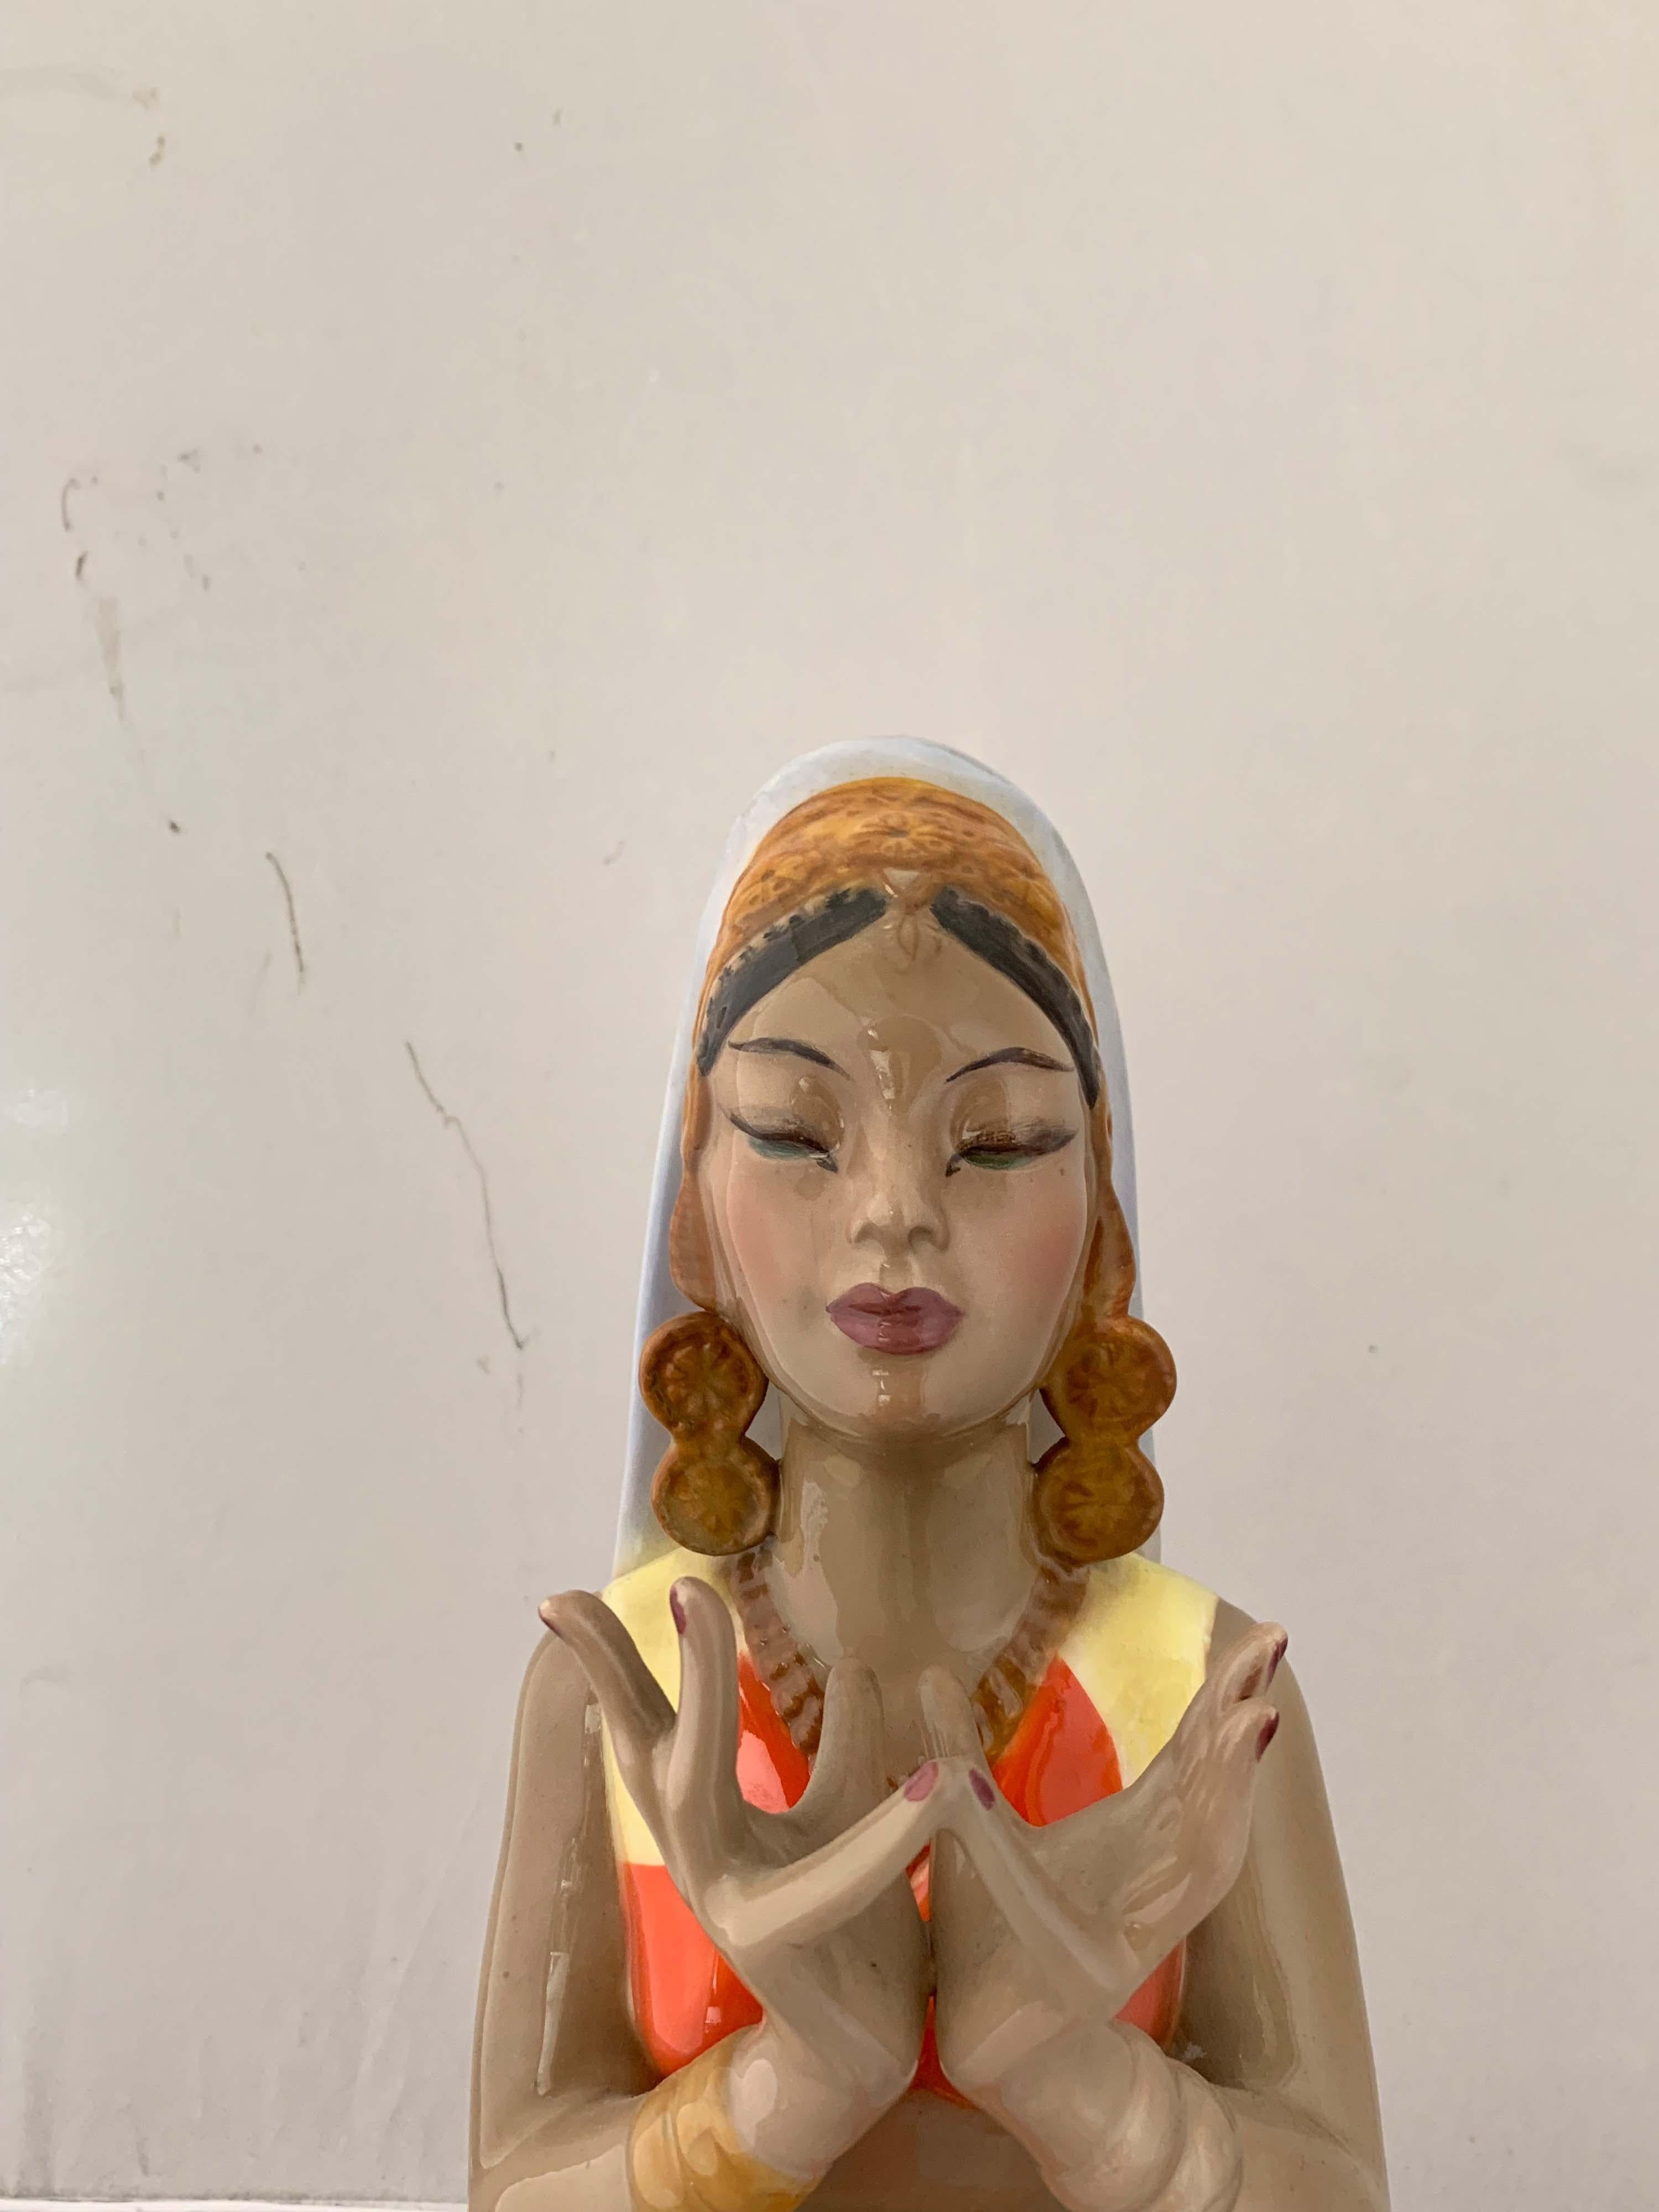 Italian Figure of a Girl in a Meditative Pose by Caterina Manna for C.I.A. Manna Torino